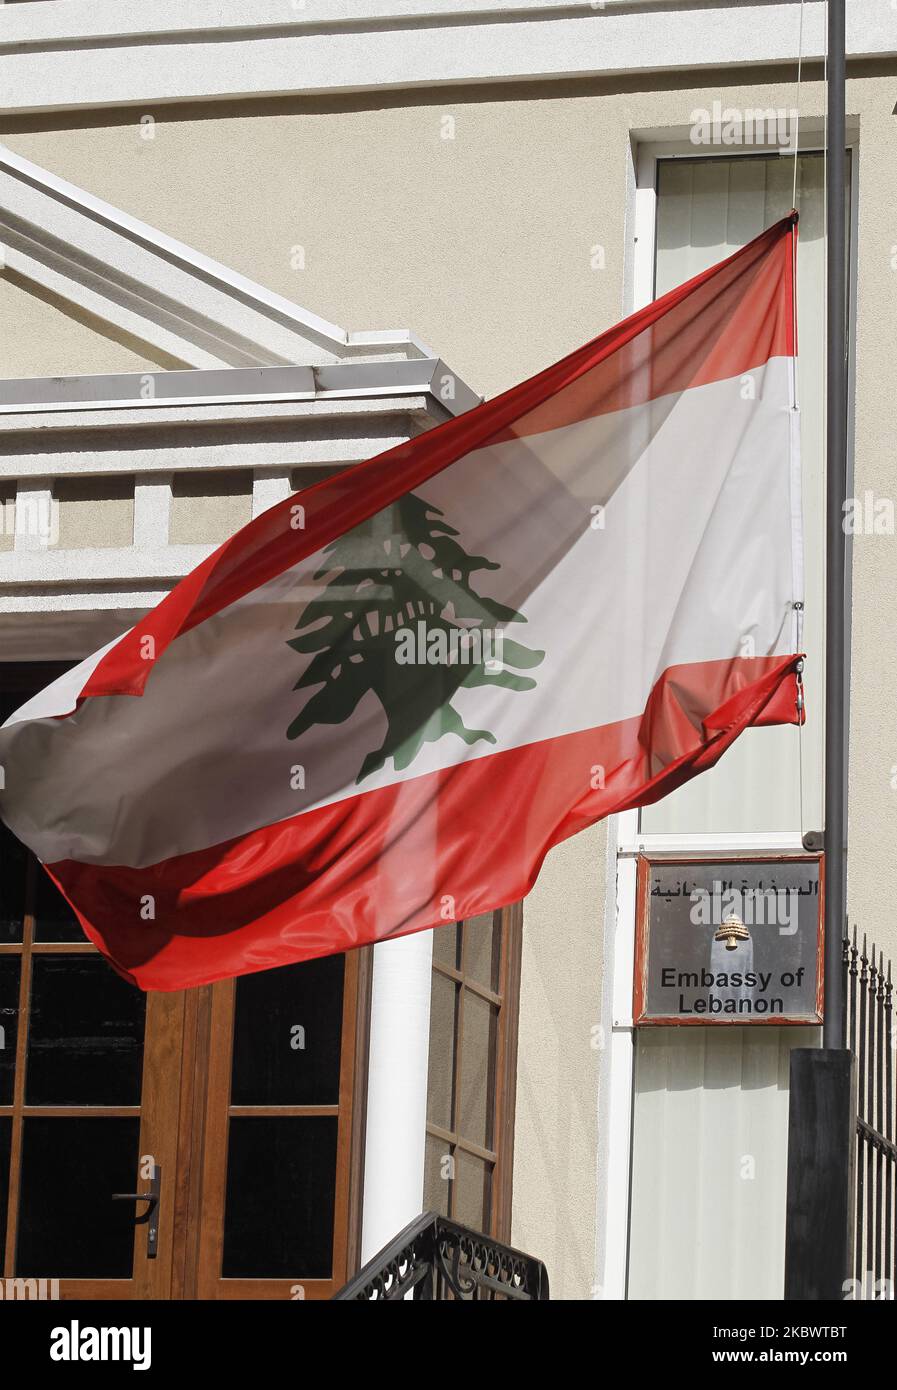 National flag of Lebanon is seen at half-mast in tribute of the victims of the blast in Beirut, on the Embassy of Lebanon in Kyiv, Ukraine, on 06 August, 2020. The massive explosion rocked the Lebanon capital Beirut on 04 August 2020, as a result killed at least 135 people and thousands injured, as media reported. (Photo by STR/NurPhoto) Stock Photo